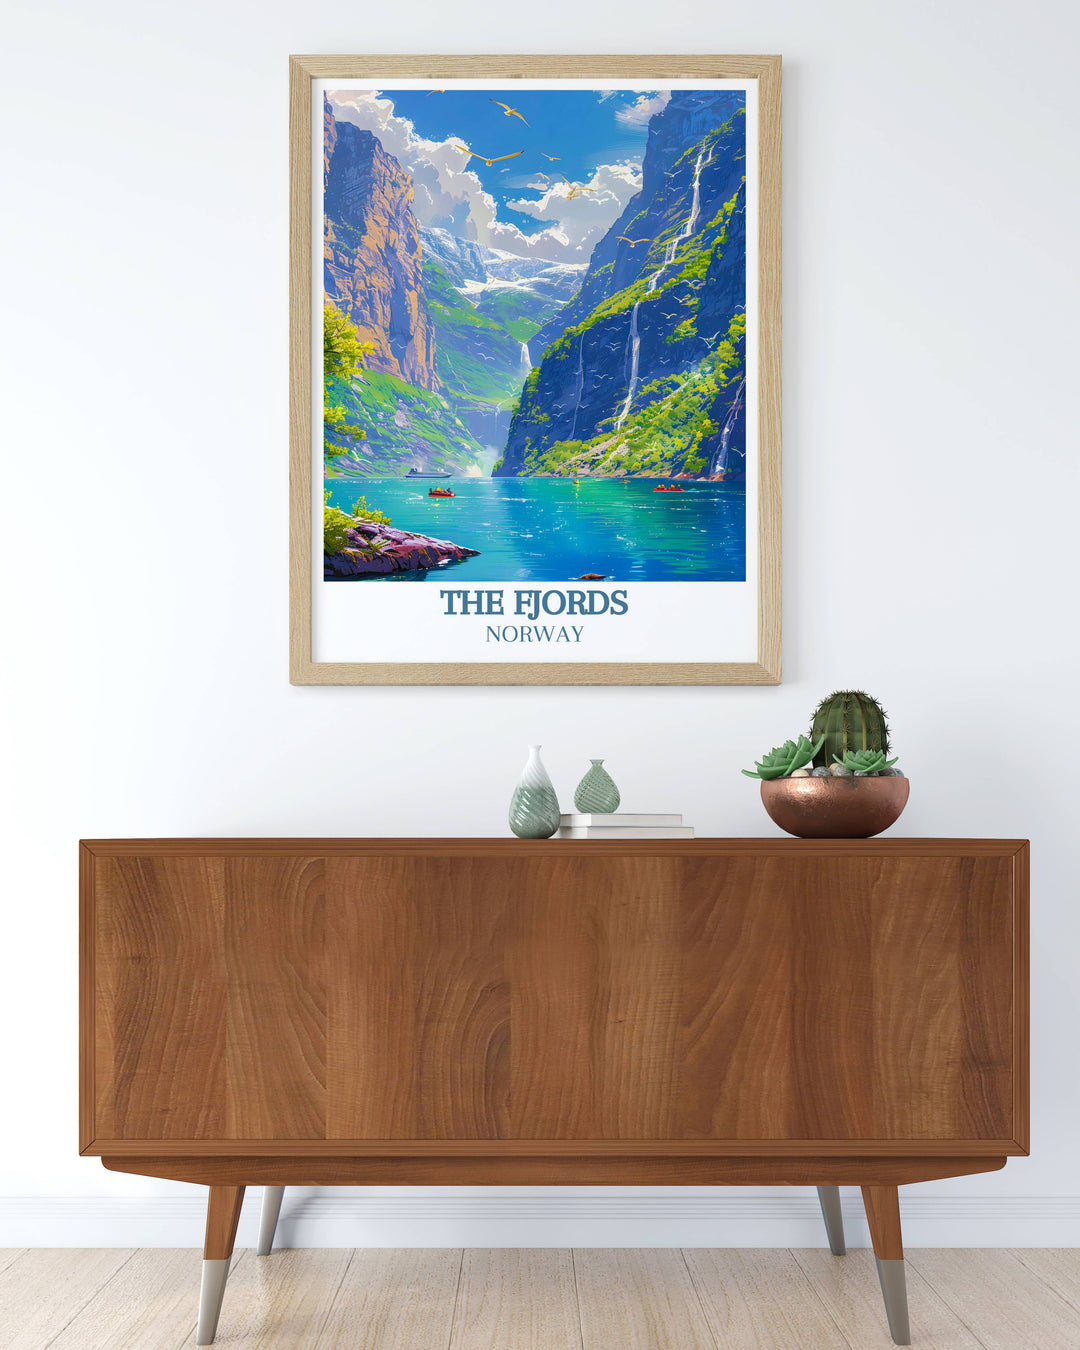 Norway Travel Posters capturing the timeless charm of the countrys scenic landscapes in a style reminiscent of classic travel advertisements, ideal for adding a unique and stylish element to your home decor.